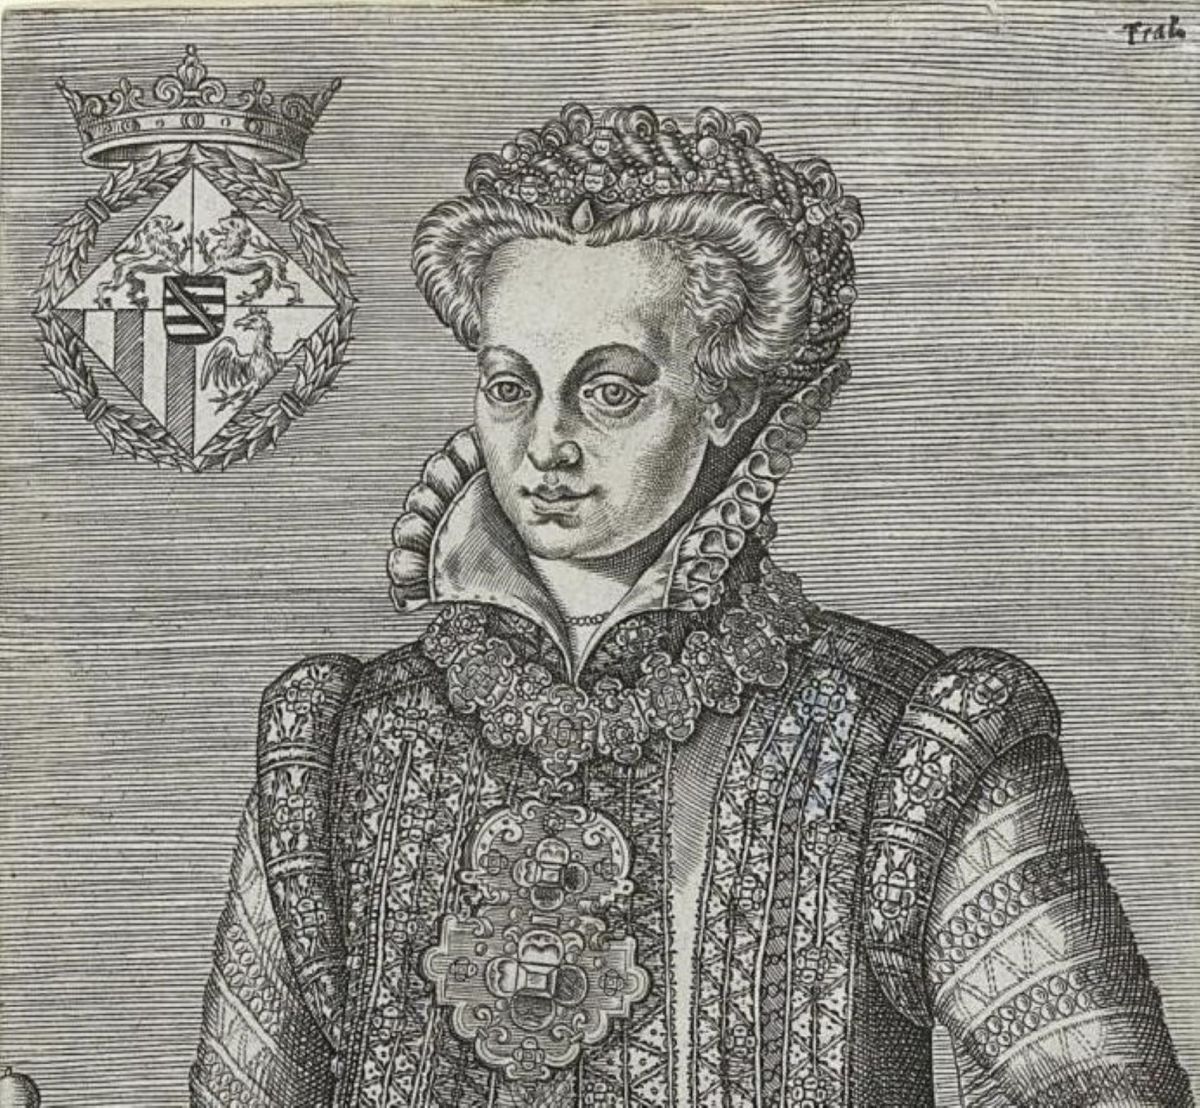 Anna of Saxony: How Her Affair Led to Her Harsh Imprisonment